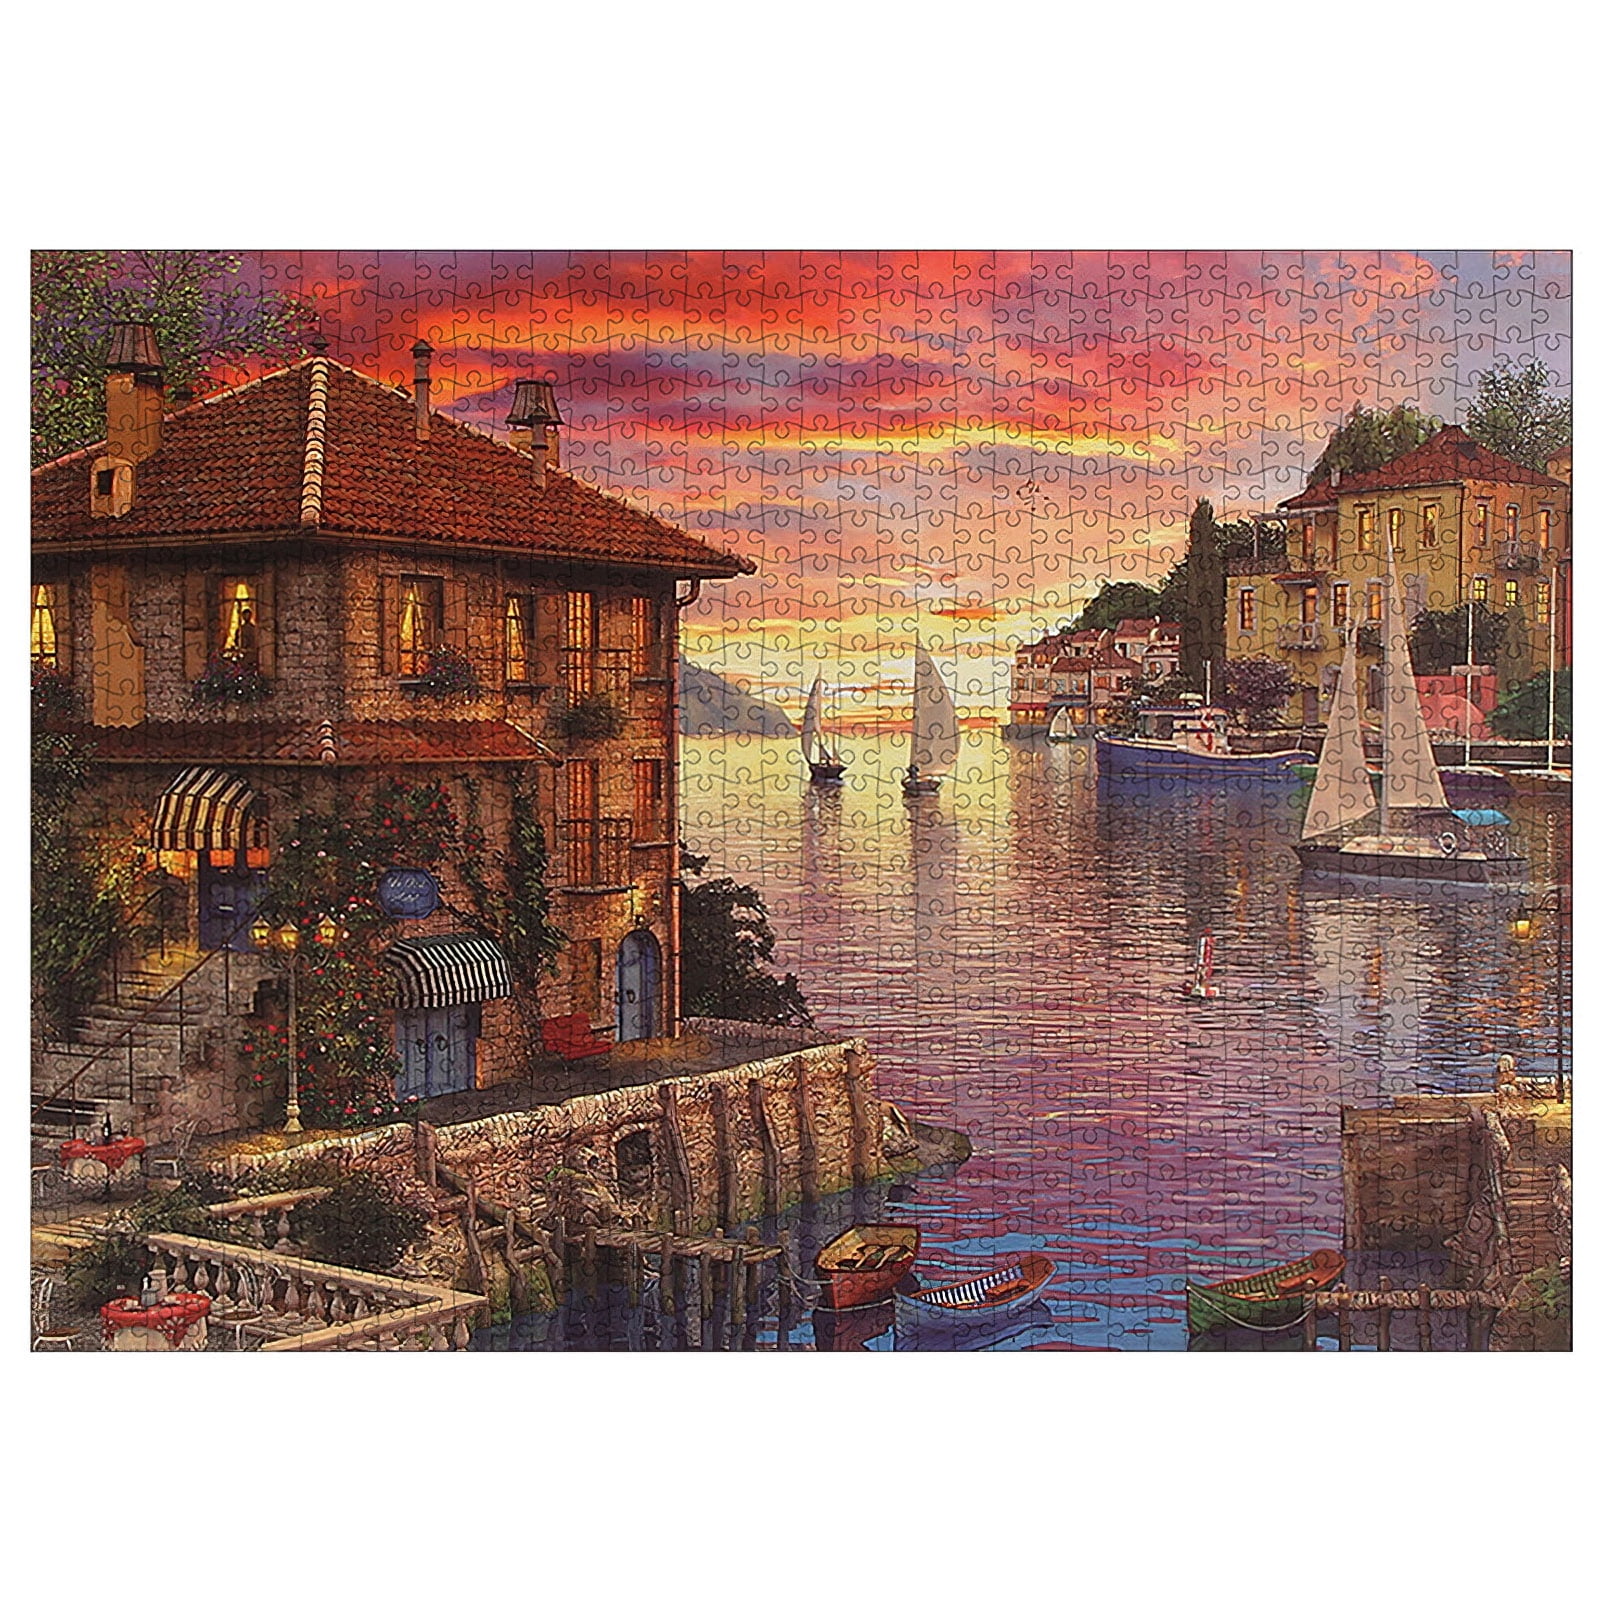 1000 Piece Jigsaw Puzzle Harbor Puzzles For Adults Kids Learning Education Gift 